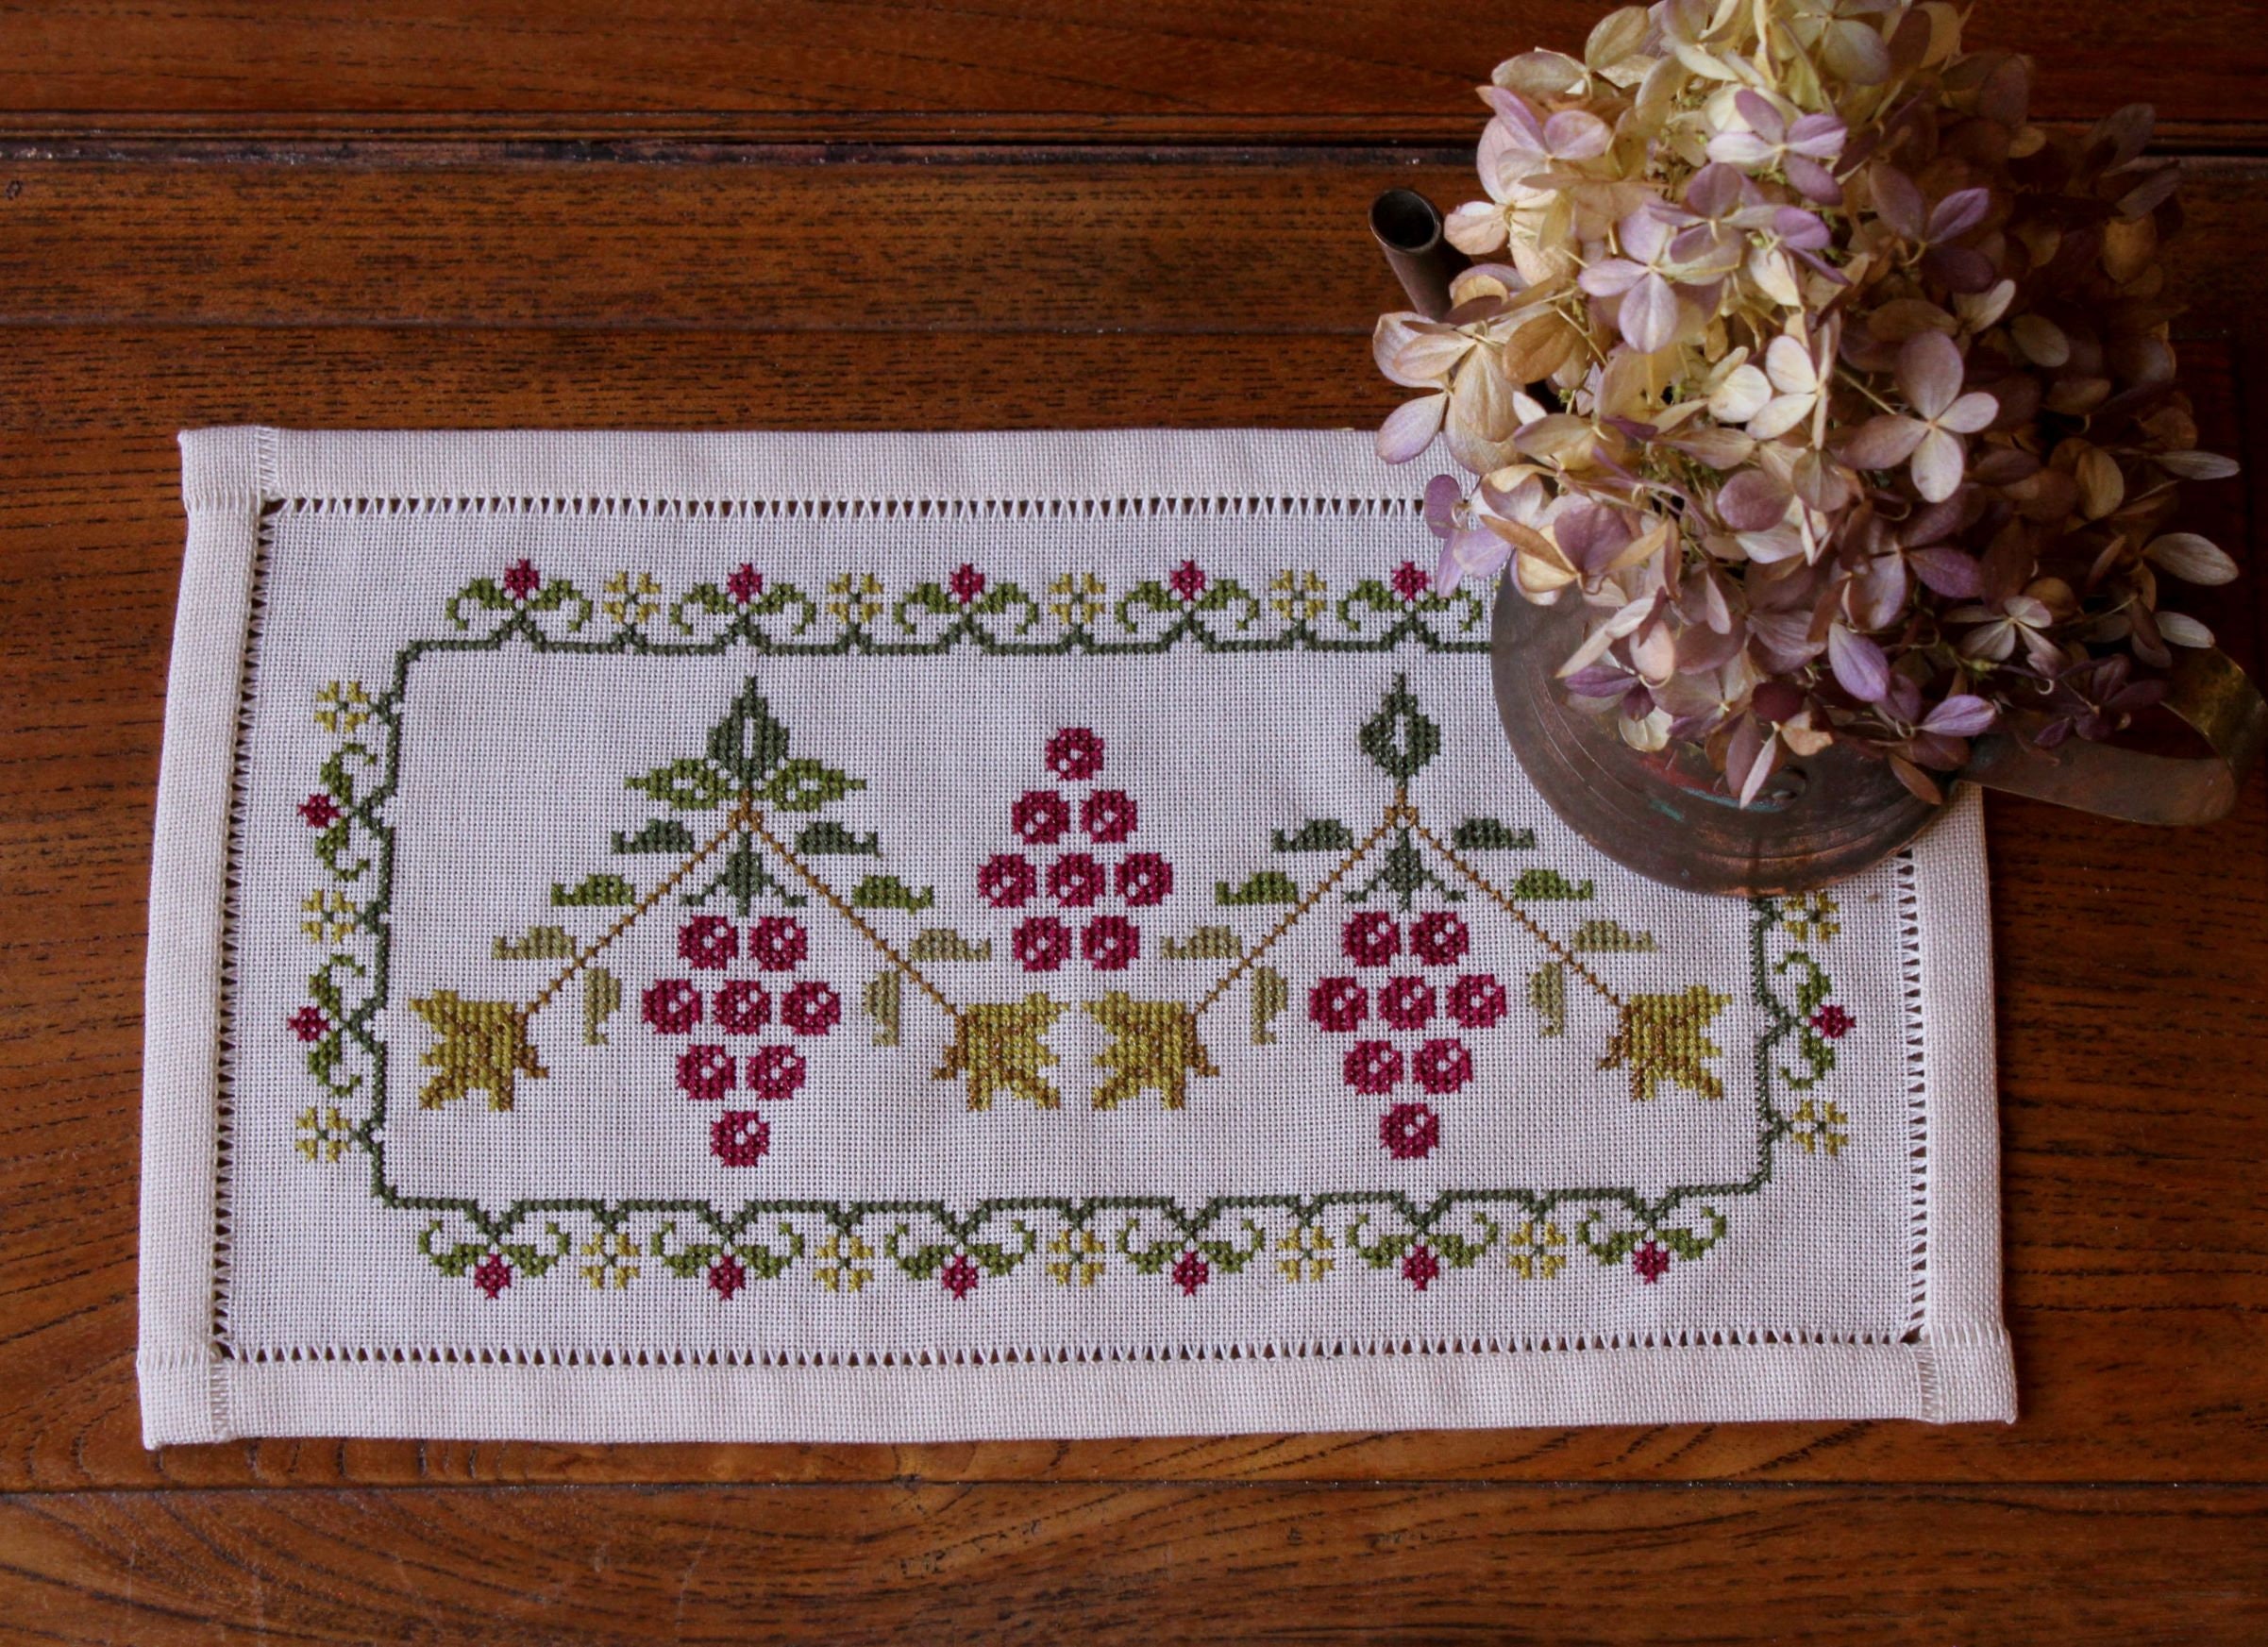 Ethnic Flower Cross Stitch Kit for Beginners with Easy Counted Pattern DIY  Kit